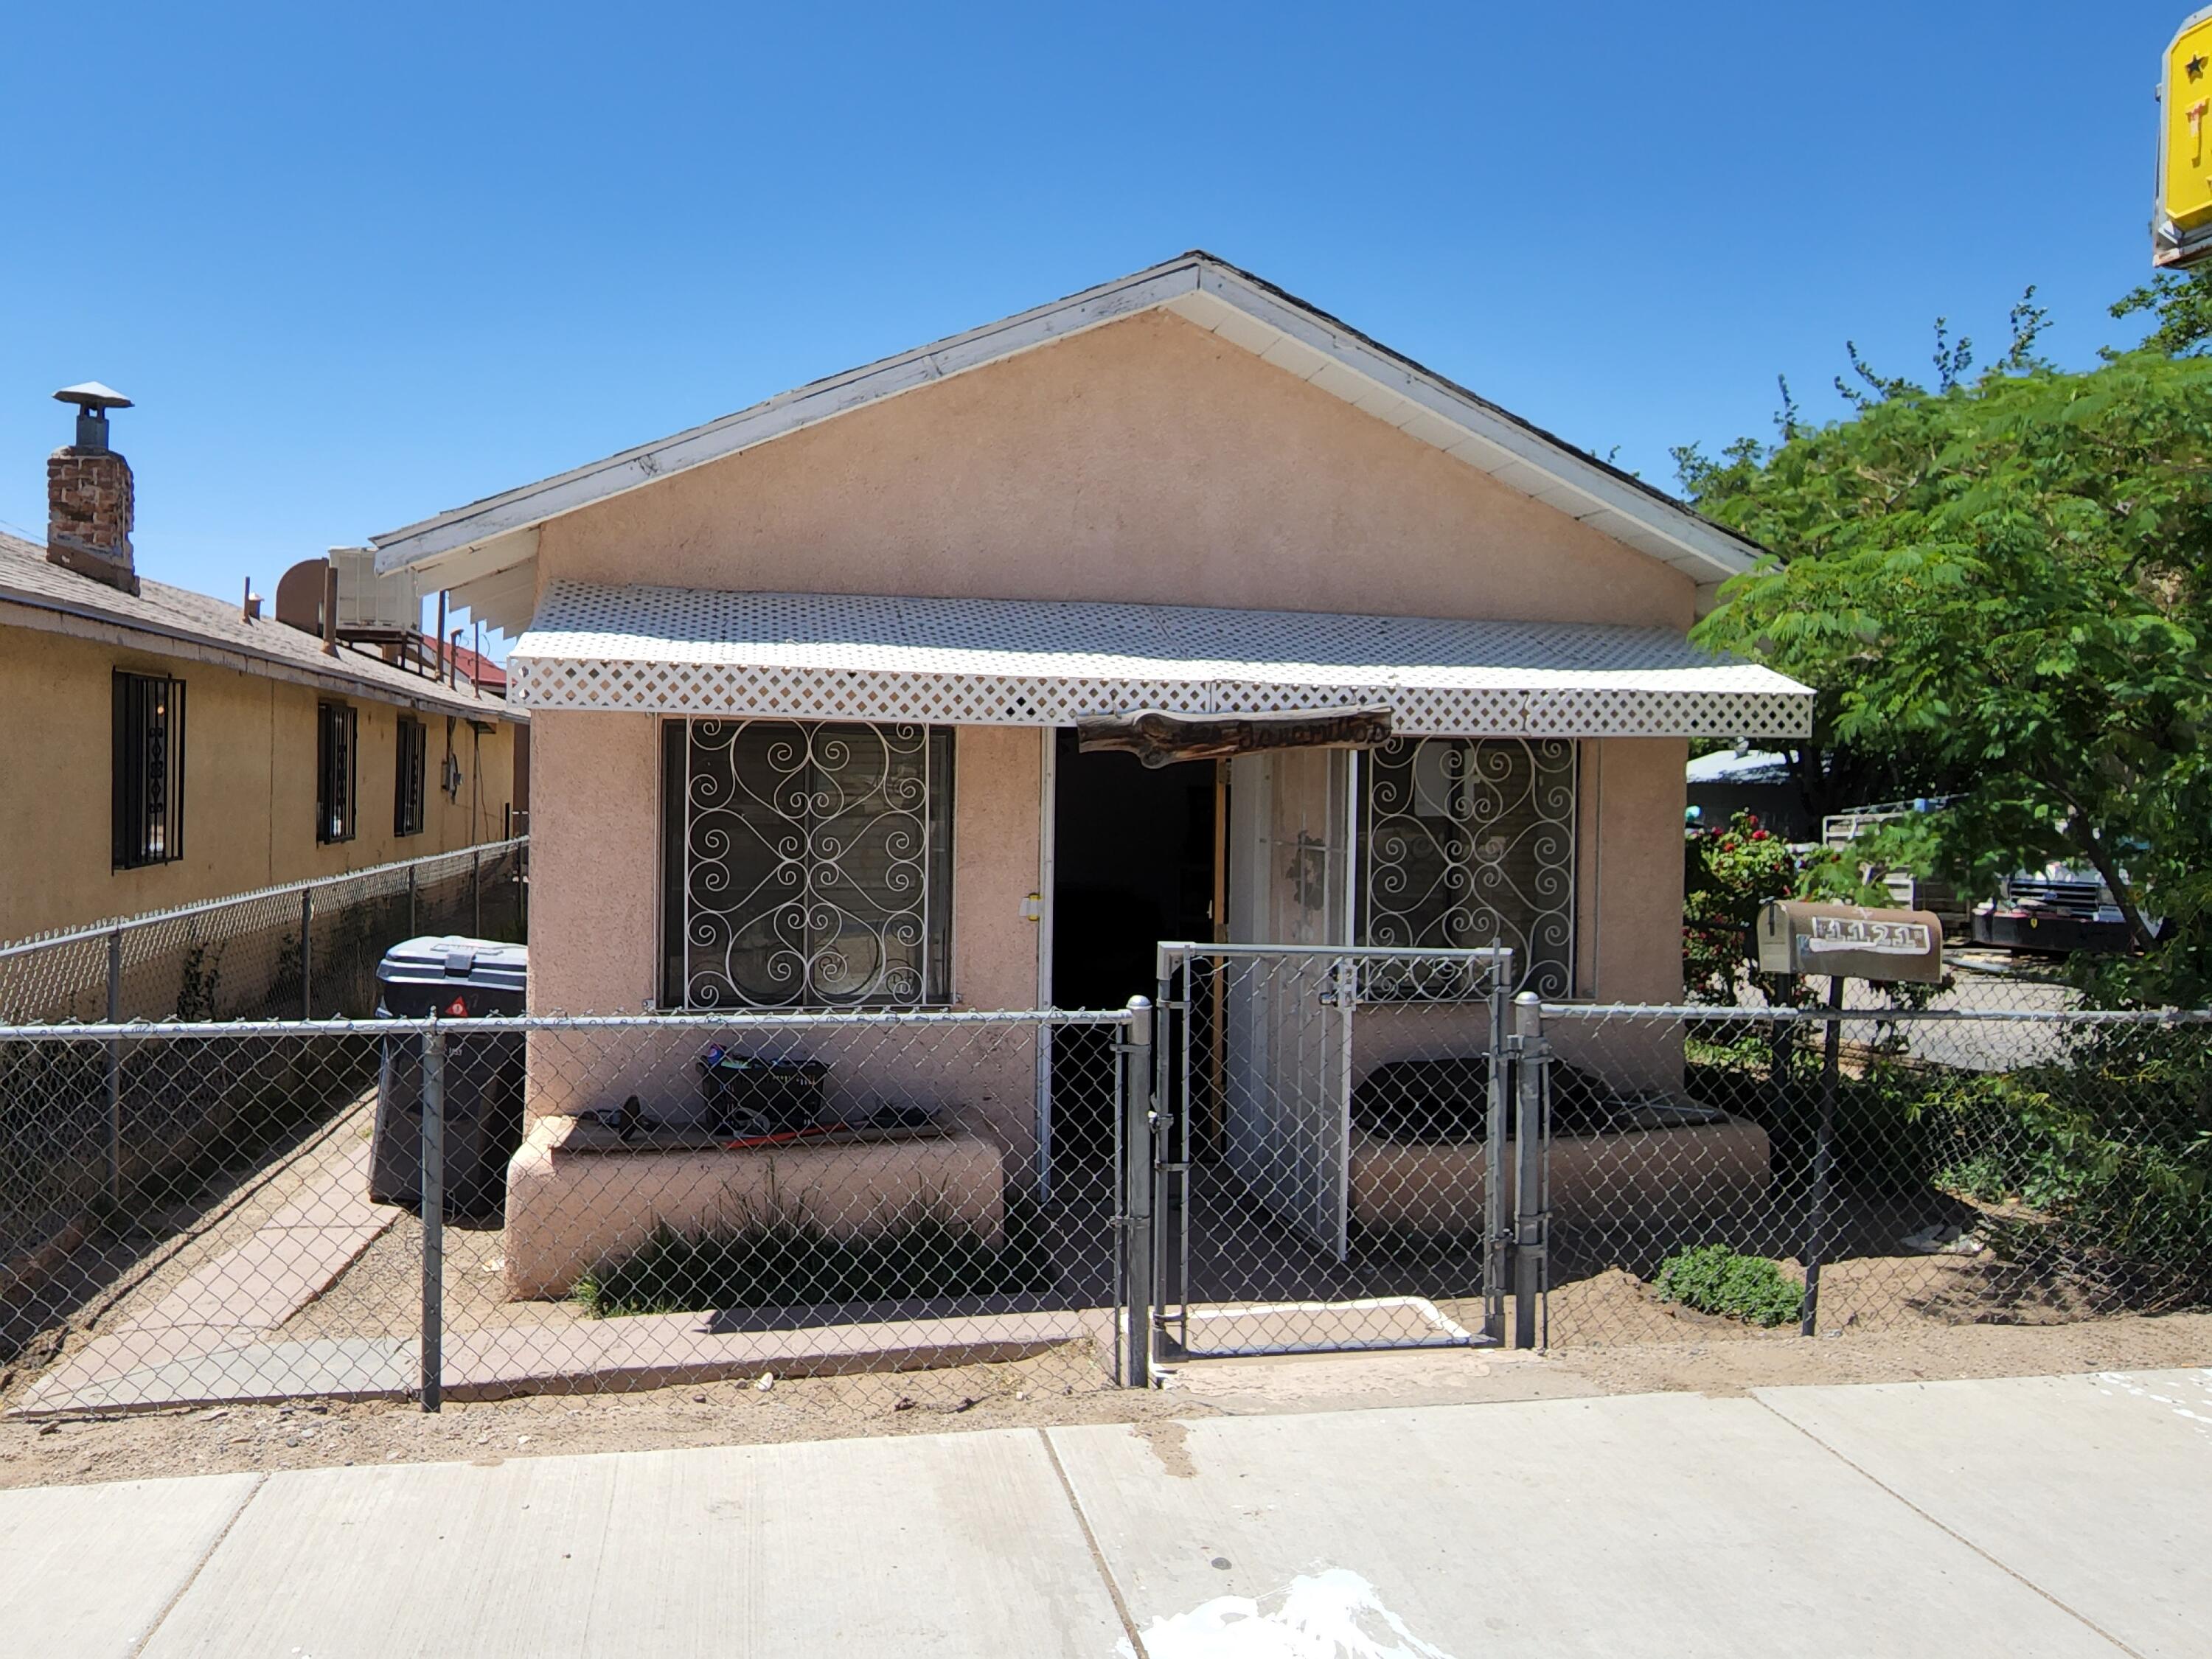 Priced to Move Fast! Super Convenient downtown Location and a little cosmetic TLC make this a Must Consider! Features Approx. 1100sq/ft 2/1 with a mixed zoning uses. Roof in process of being replaced (see lo/so remarks). Sold ''AS IS'' make us an offer we can't refuse!